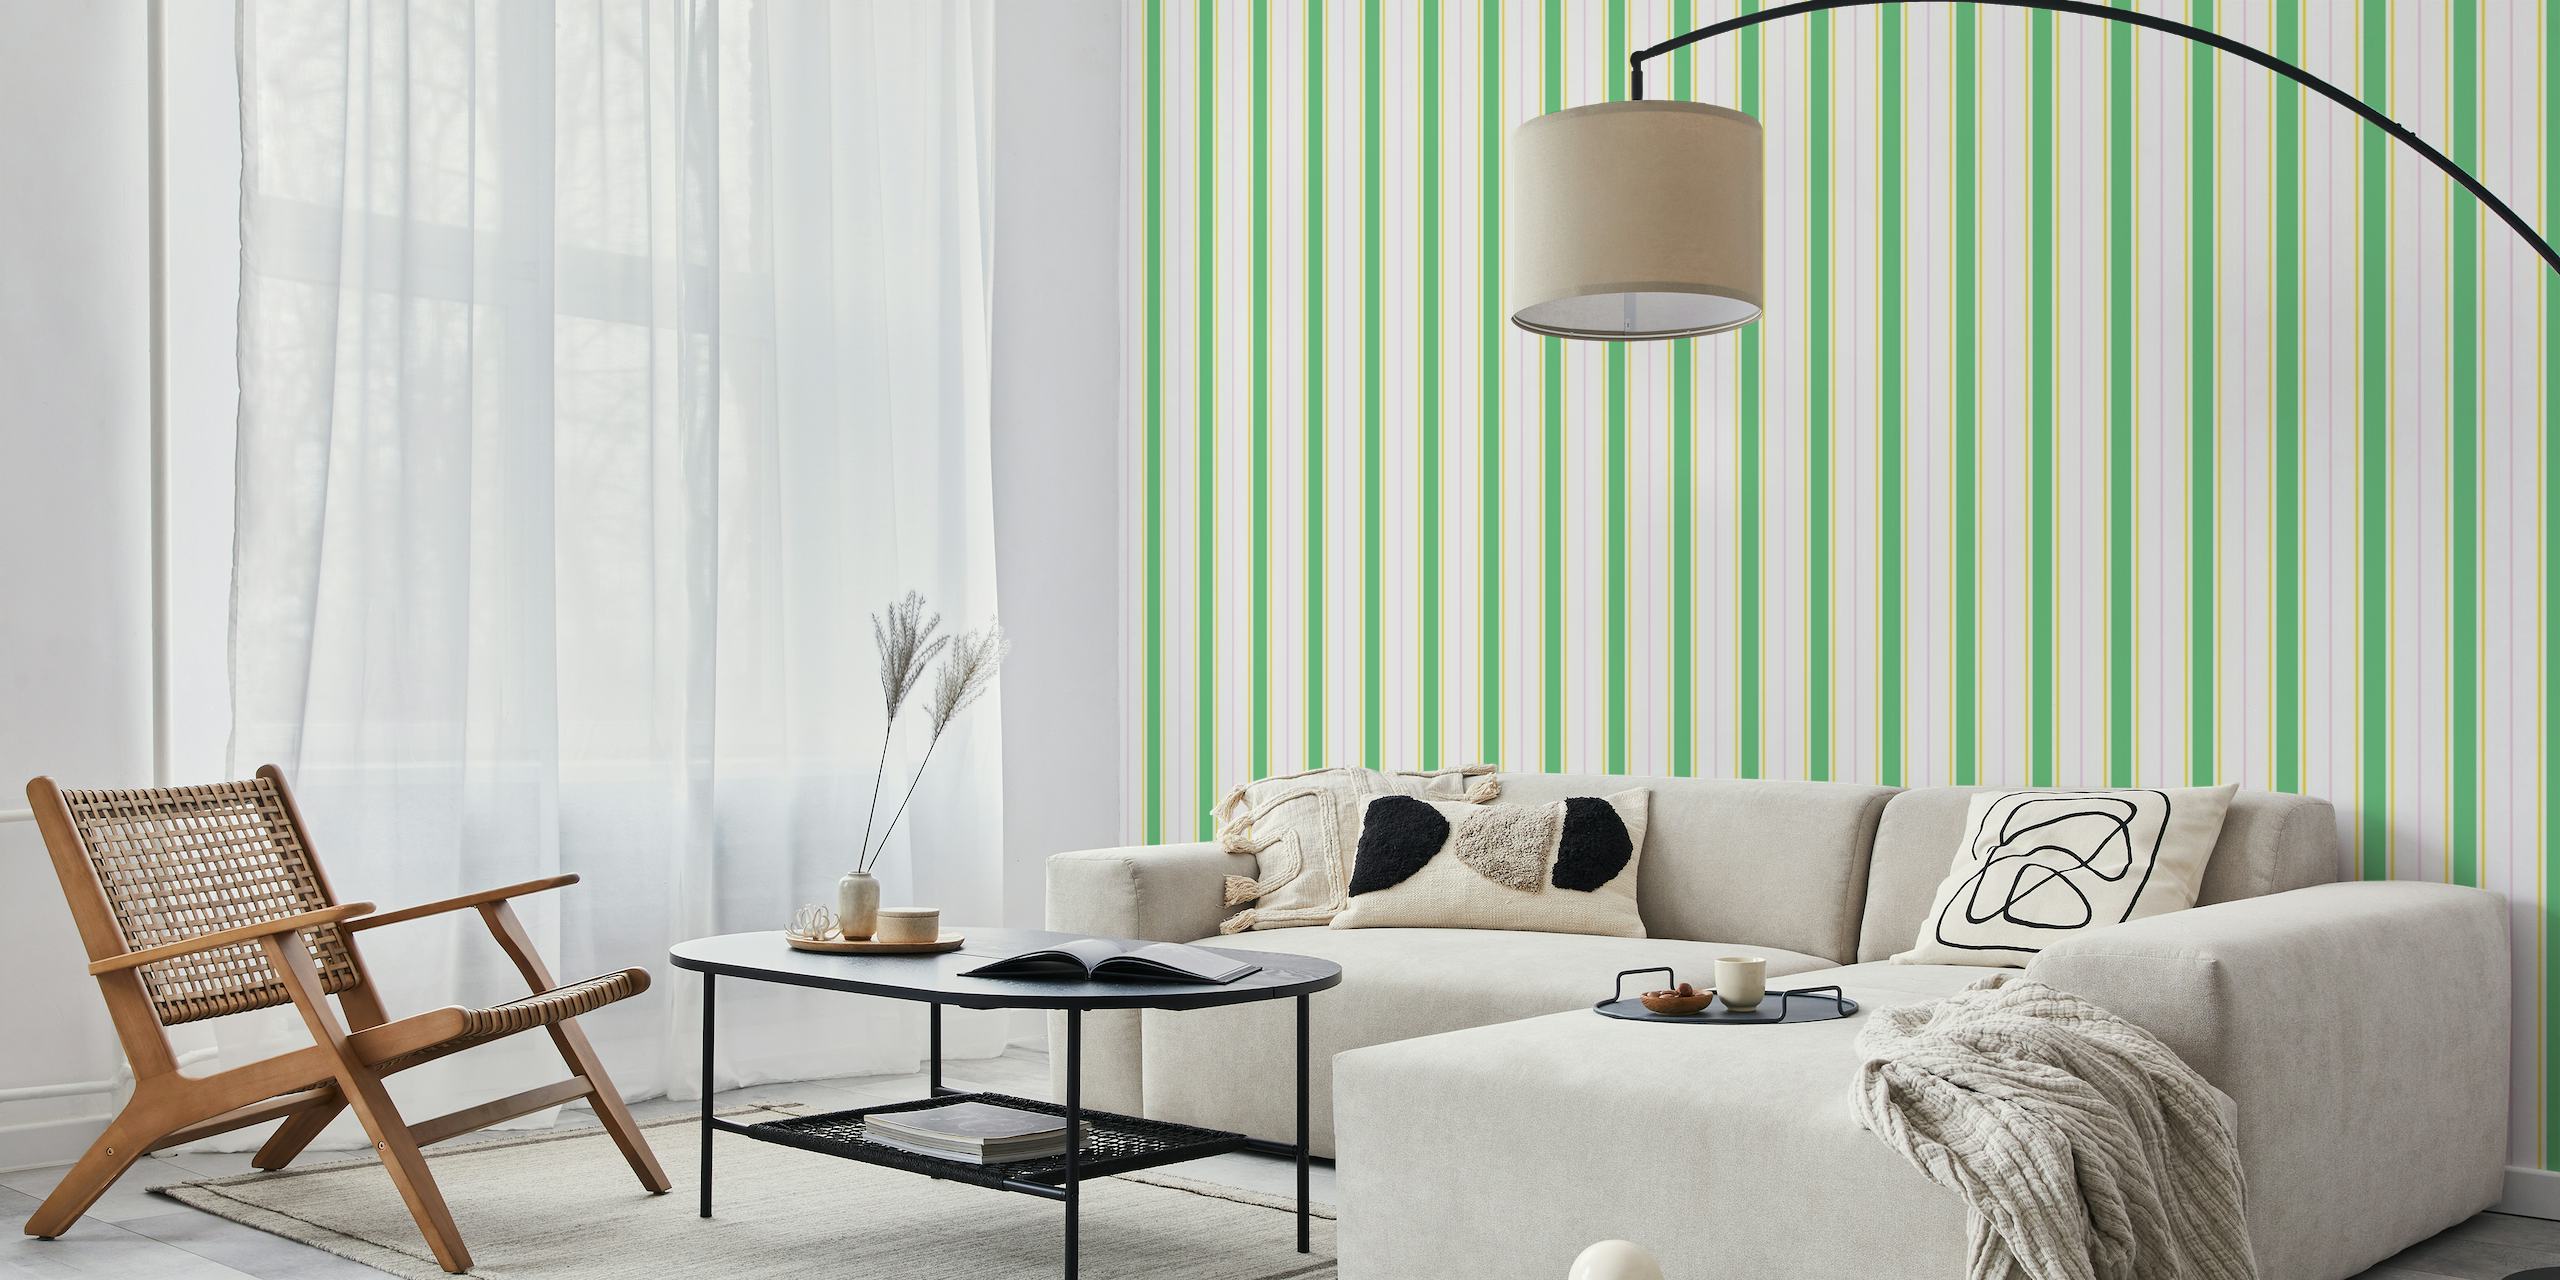 Vibrant summer stripes wall mural in shades of green, yellow, and pink.